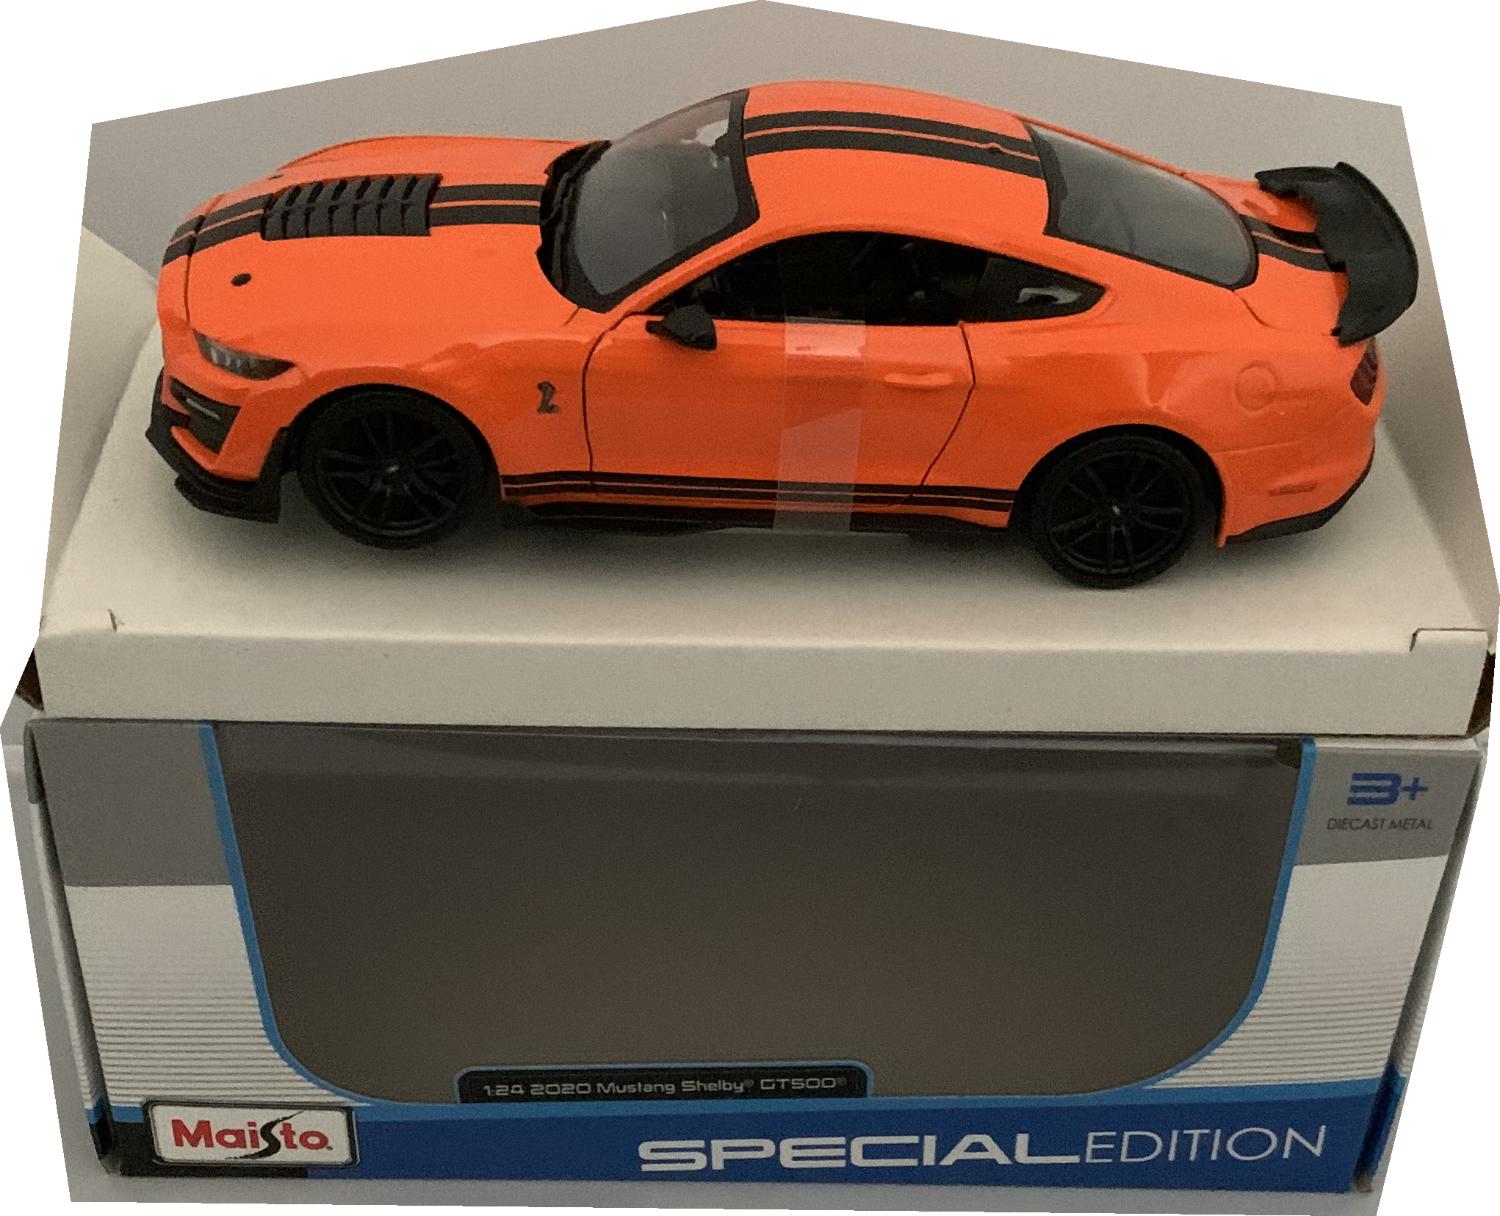 A good reproduction of the Ford Mustang Shelby GT500 with detail throughout, all authentically recreated.  The model is presented in a window display box, the car is approx. 20 cm long and the presentation box is 23 cm long